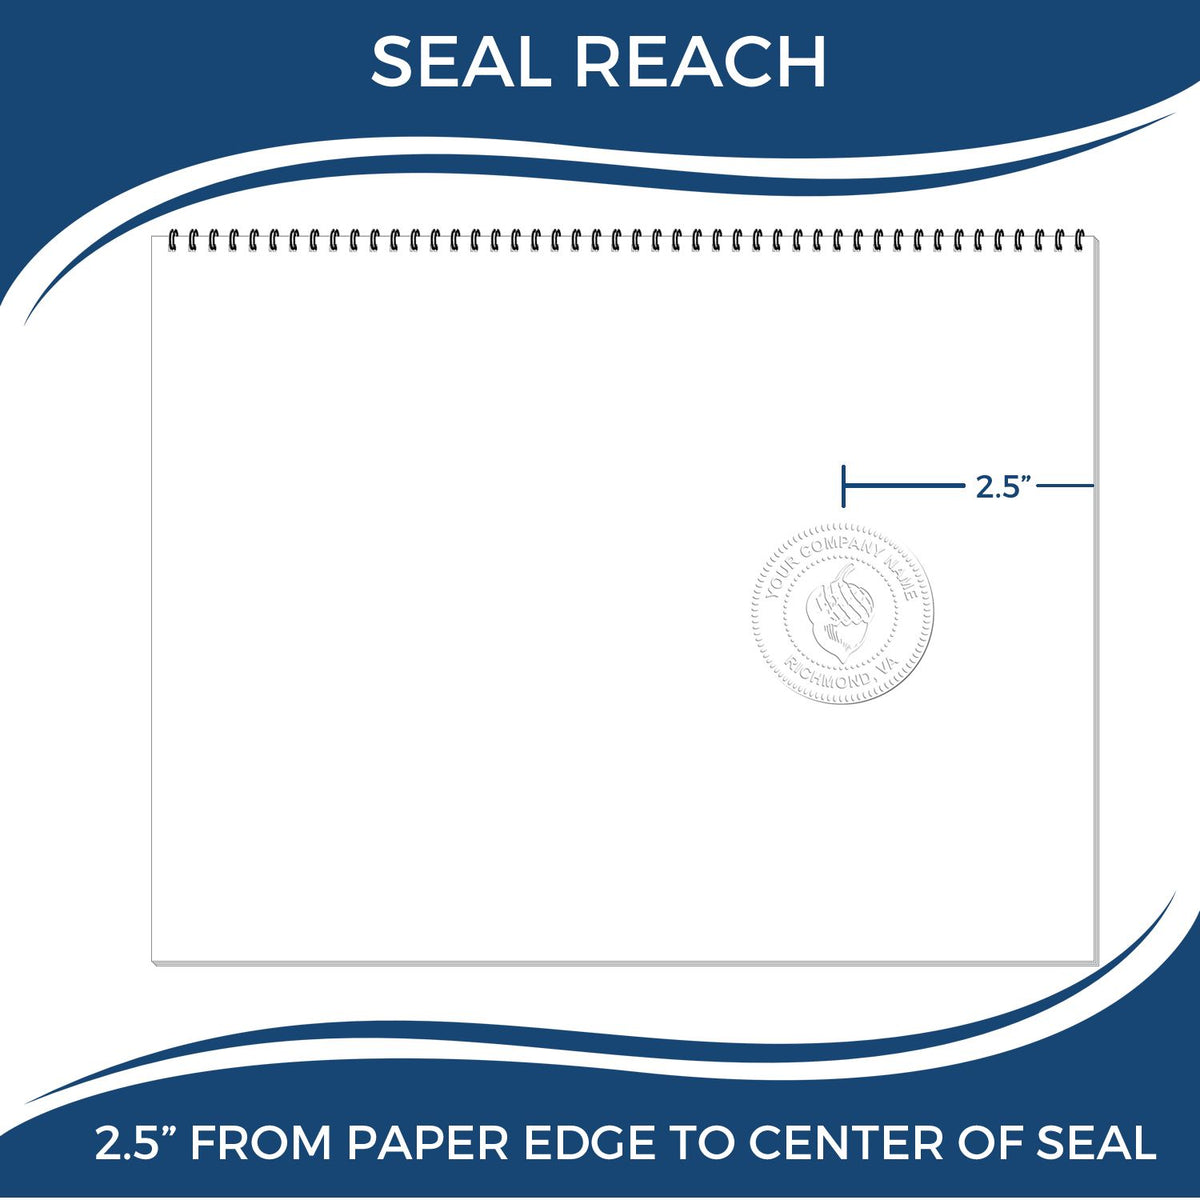 An infographic showing the seal reach which is represented by a ruler and a miniature seal image of the Heavy Duty Cast Iron Pennsylvania Geologist Seal Embosser